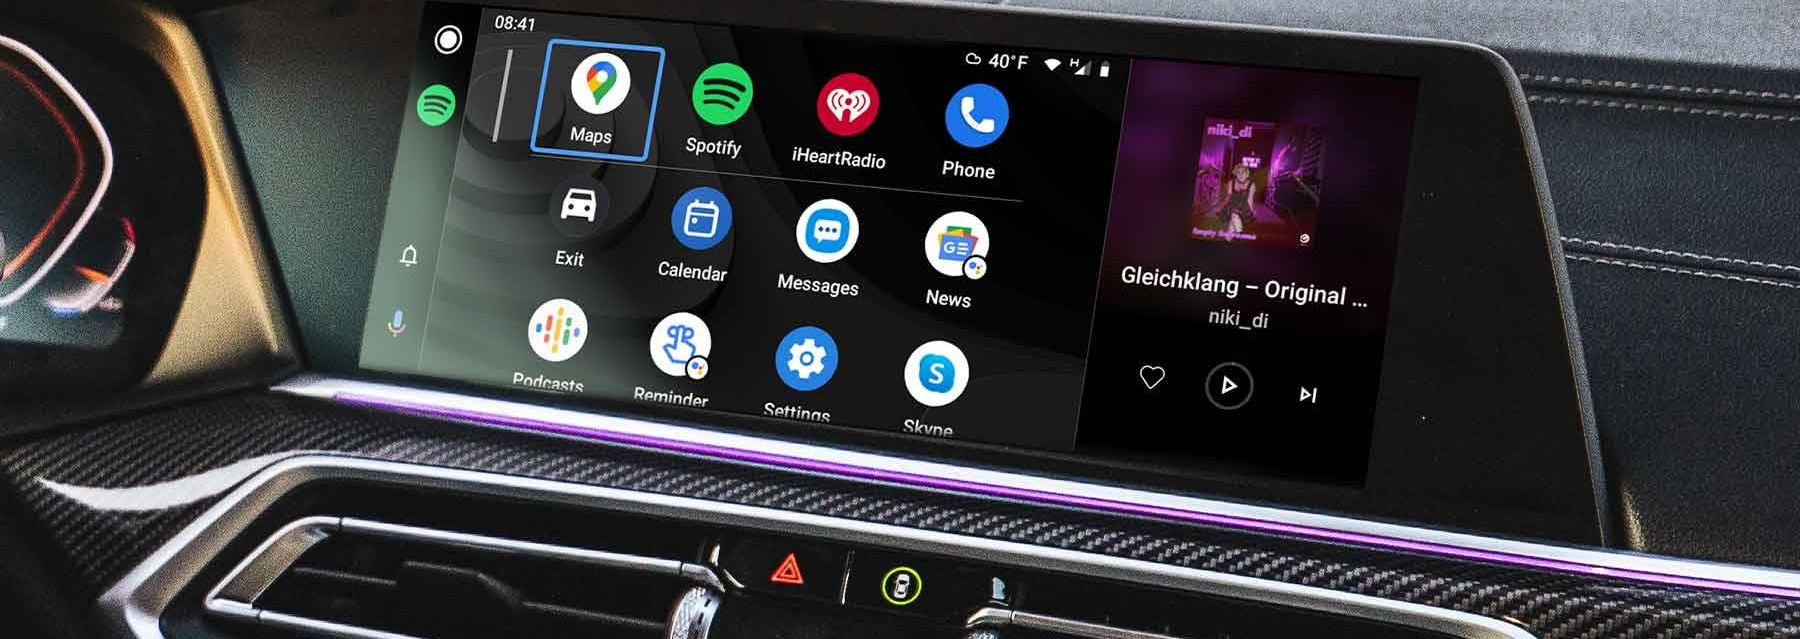 BMW Android Auto Activation